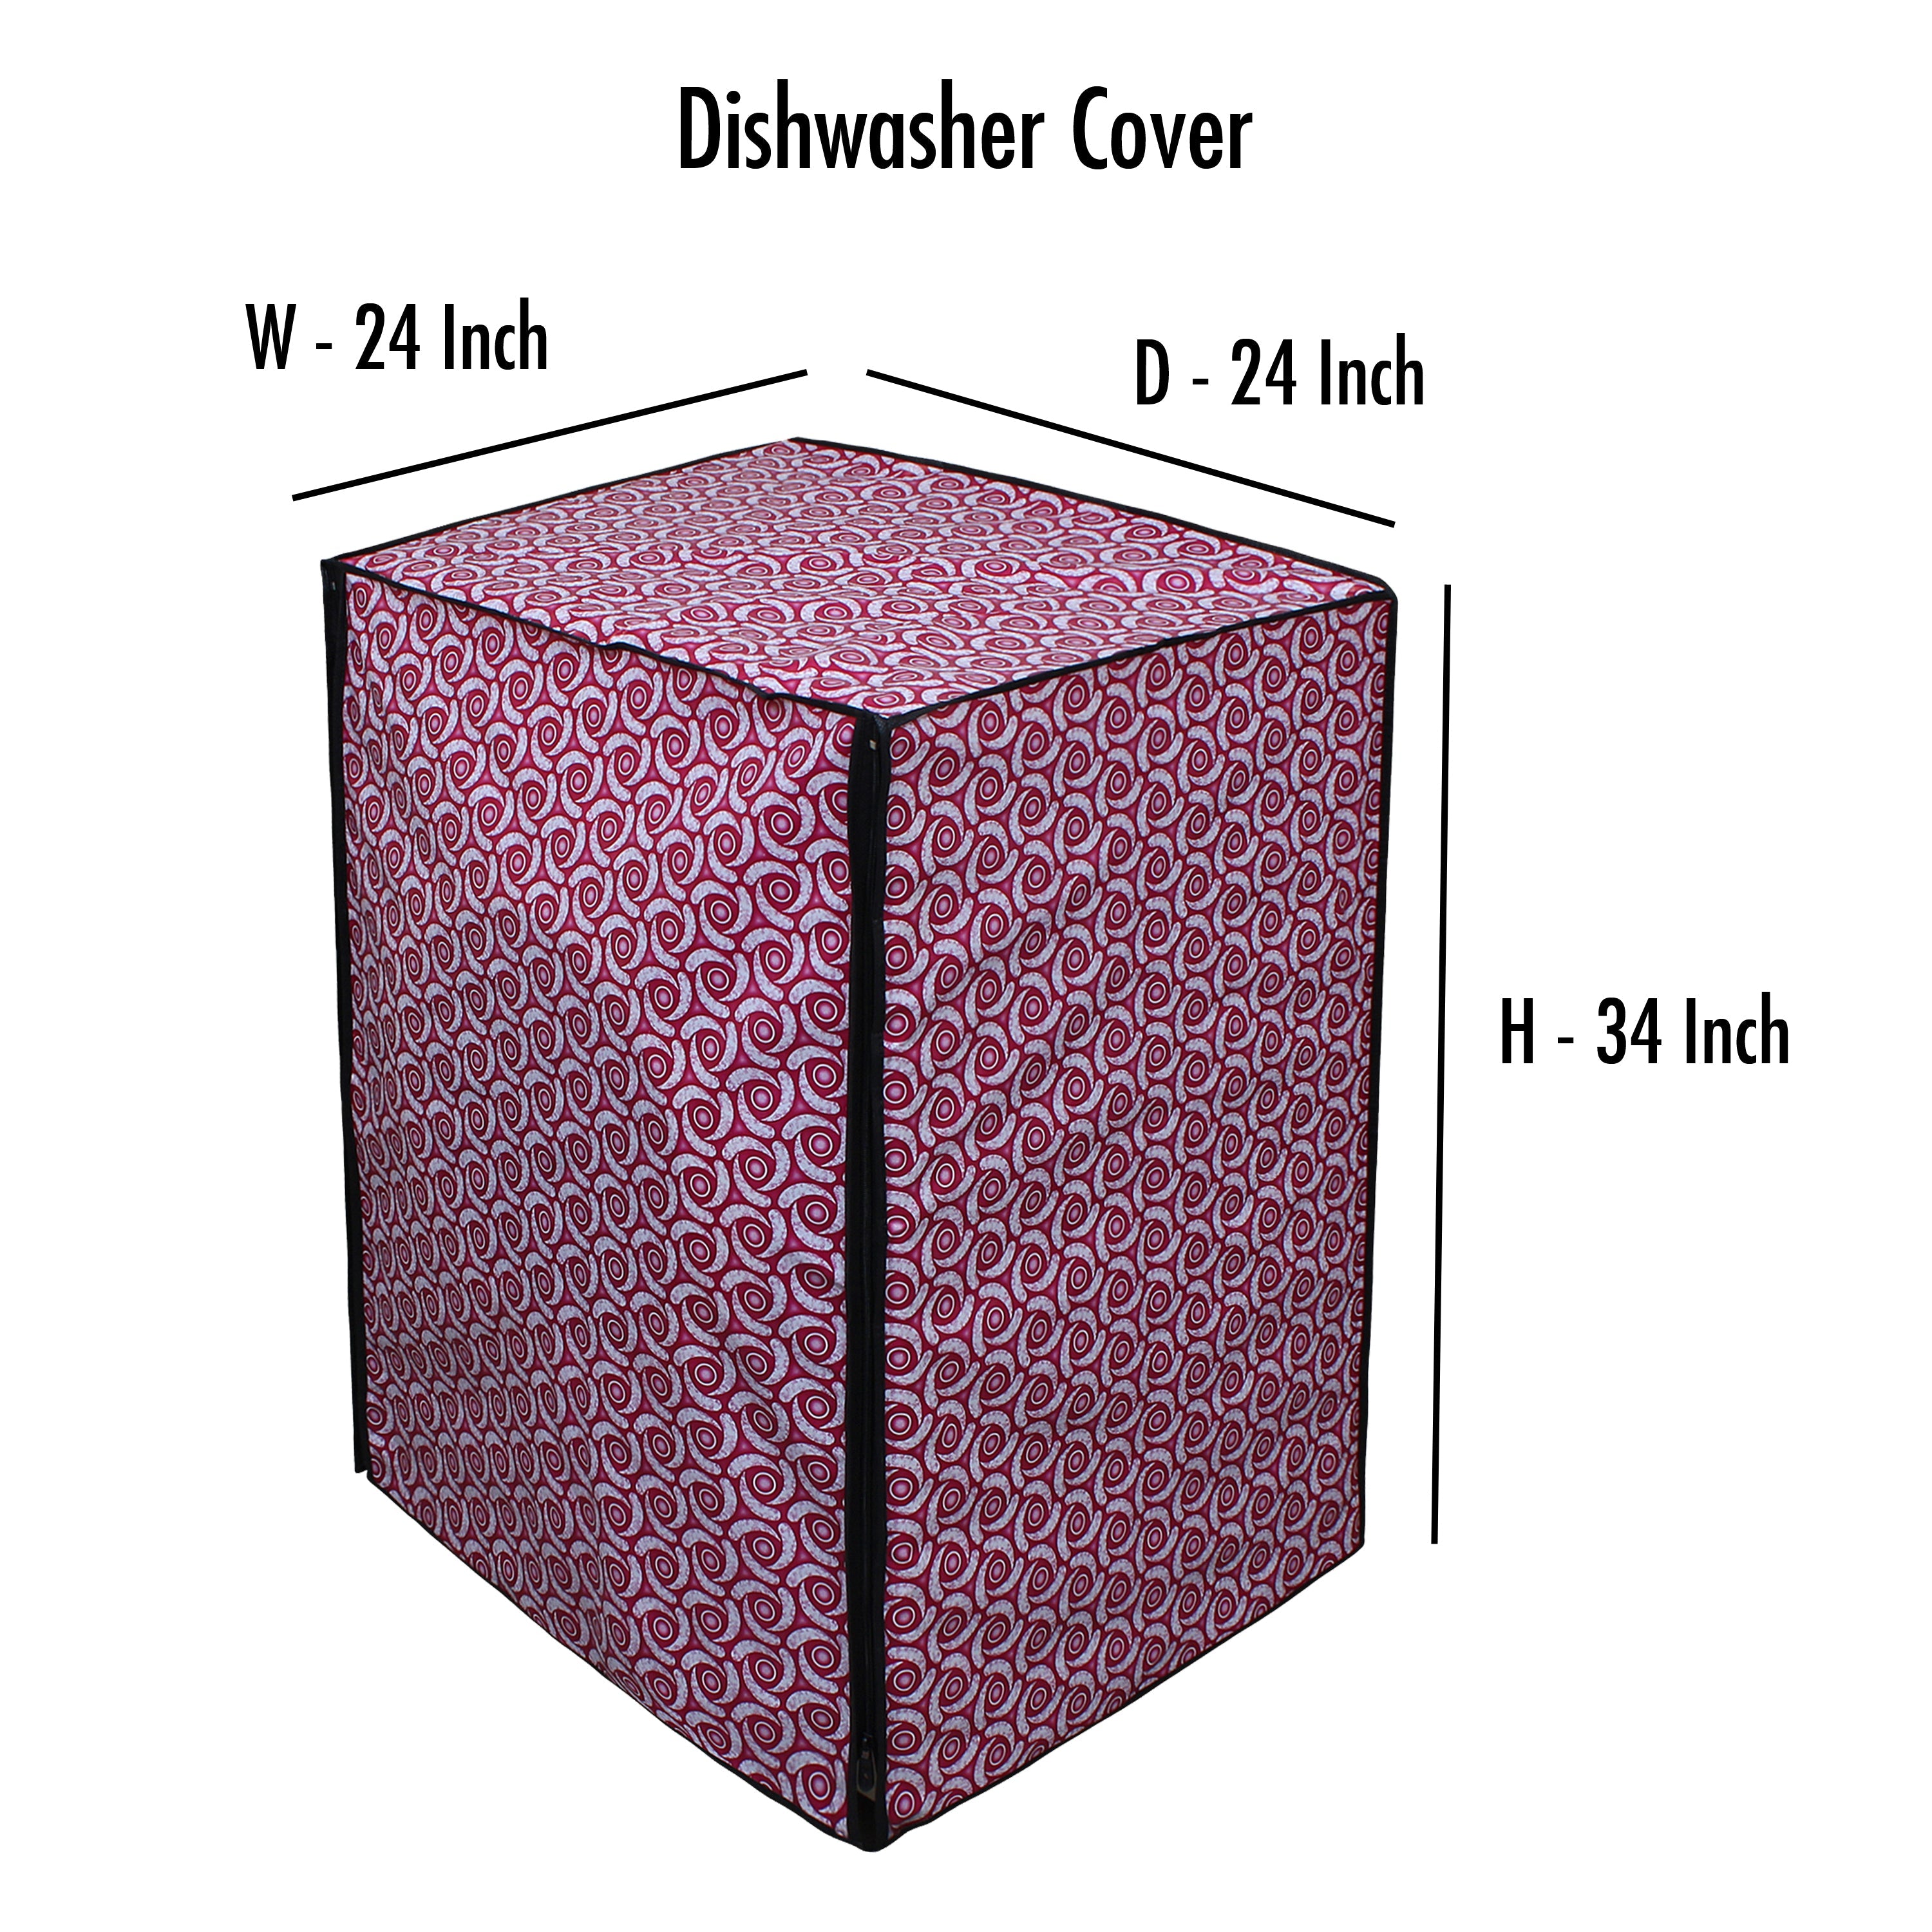 Waterproof and Dustproof Dishwasher Cover, SA57 - Dream Care Furnishings Private Limited